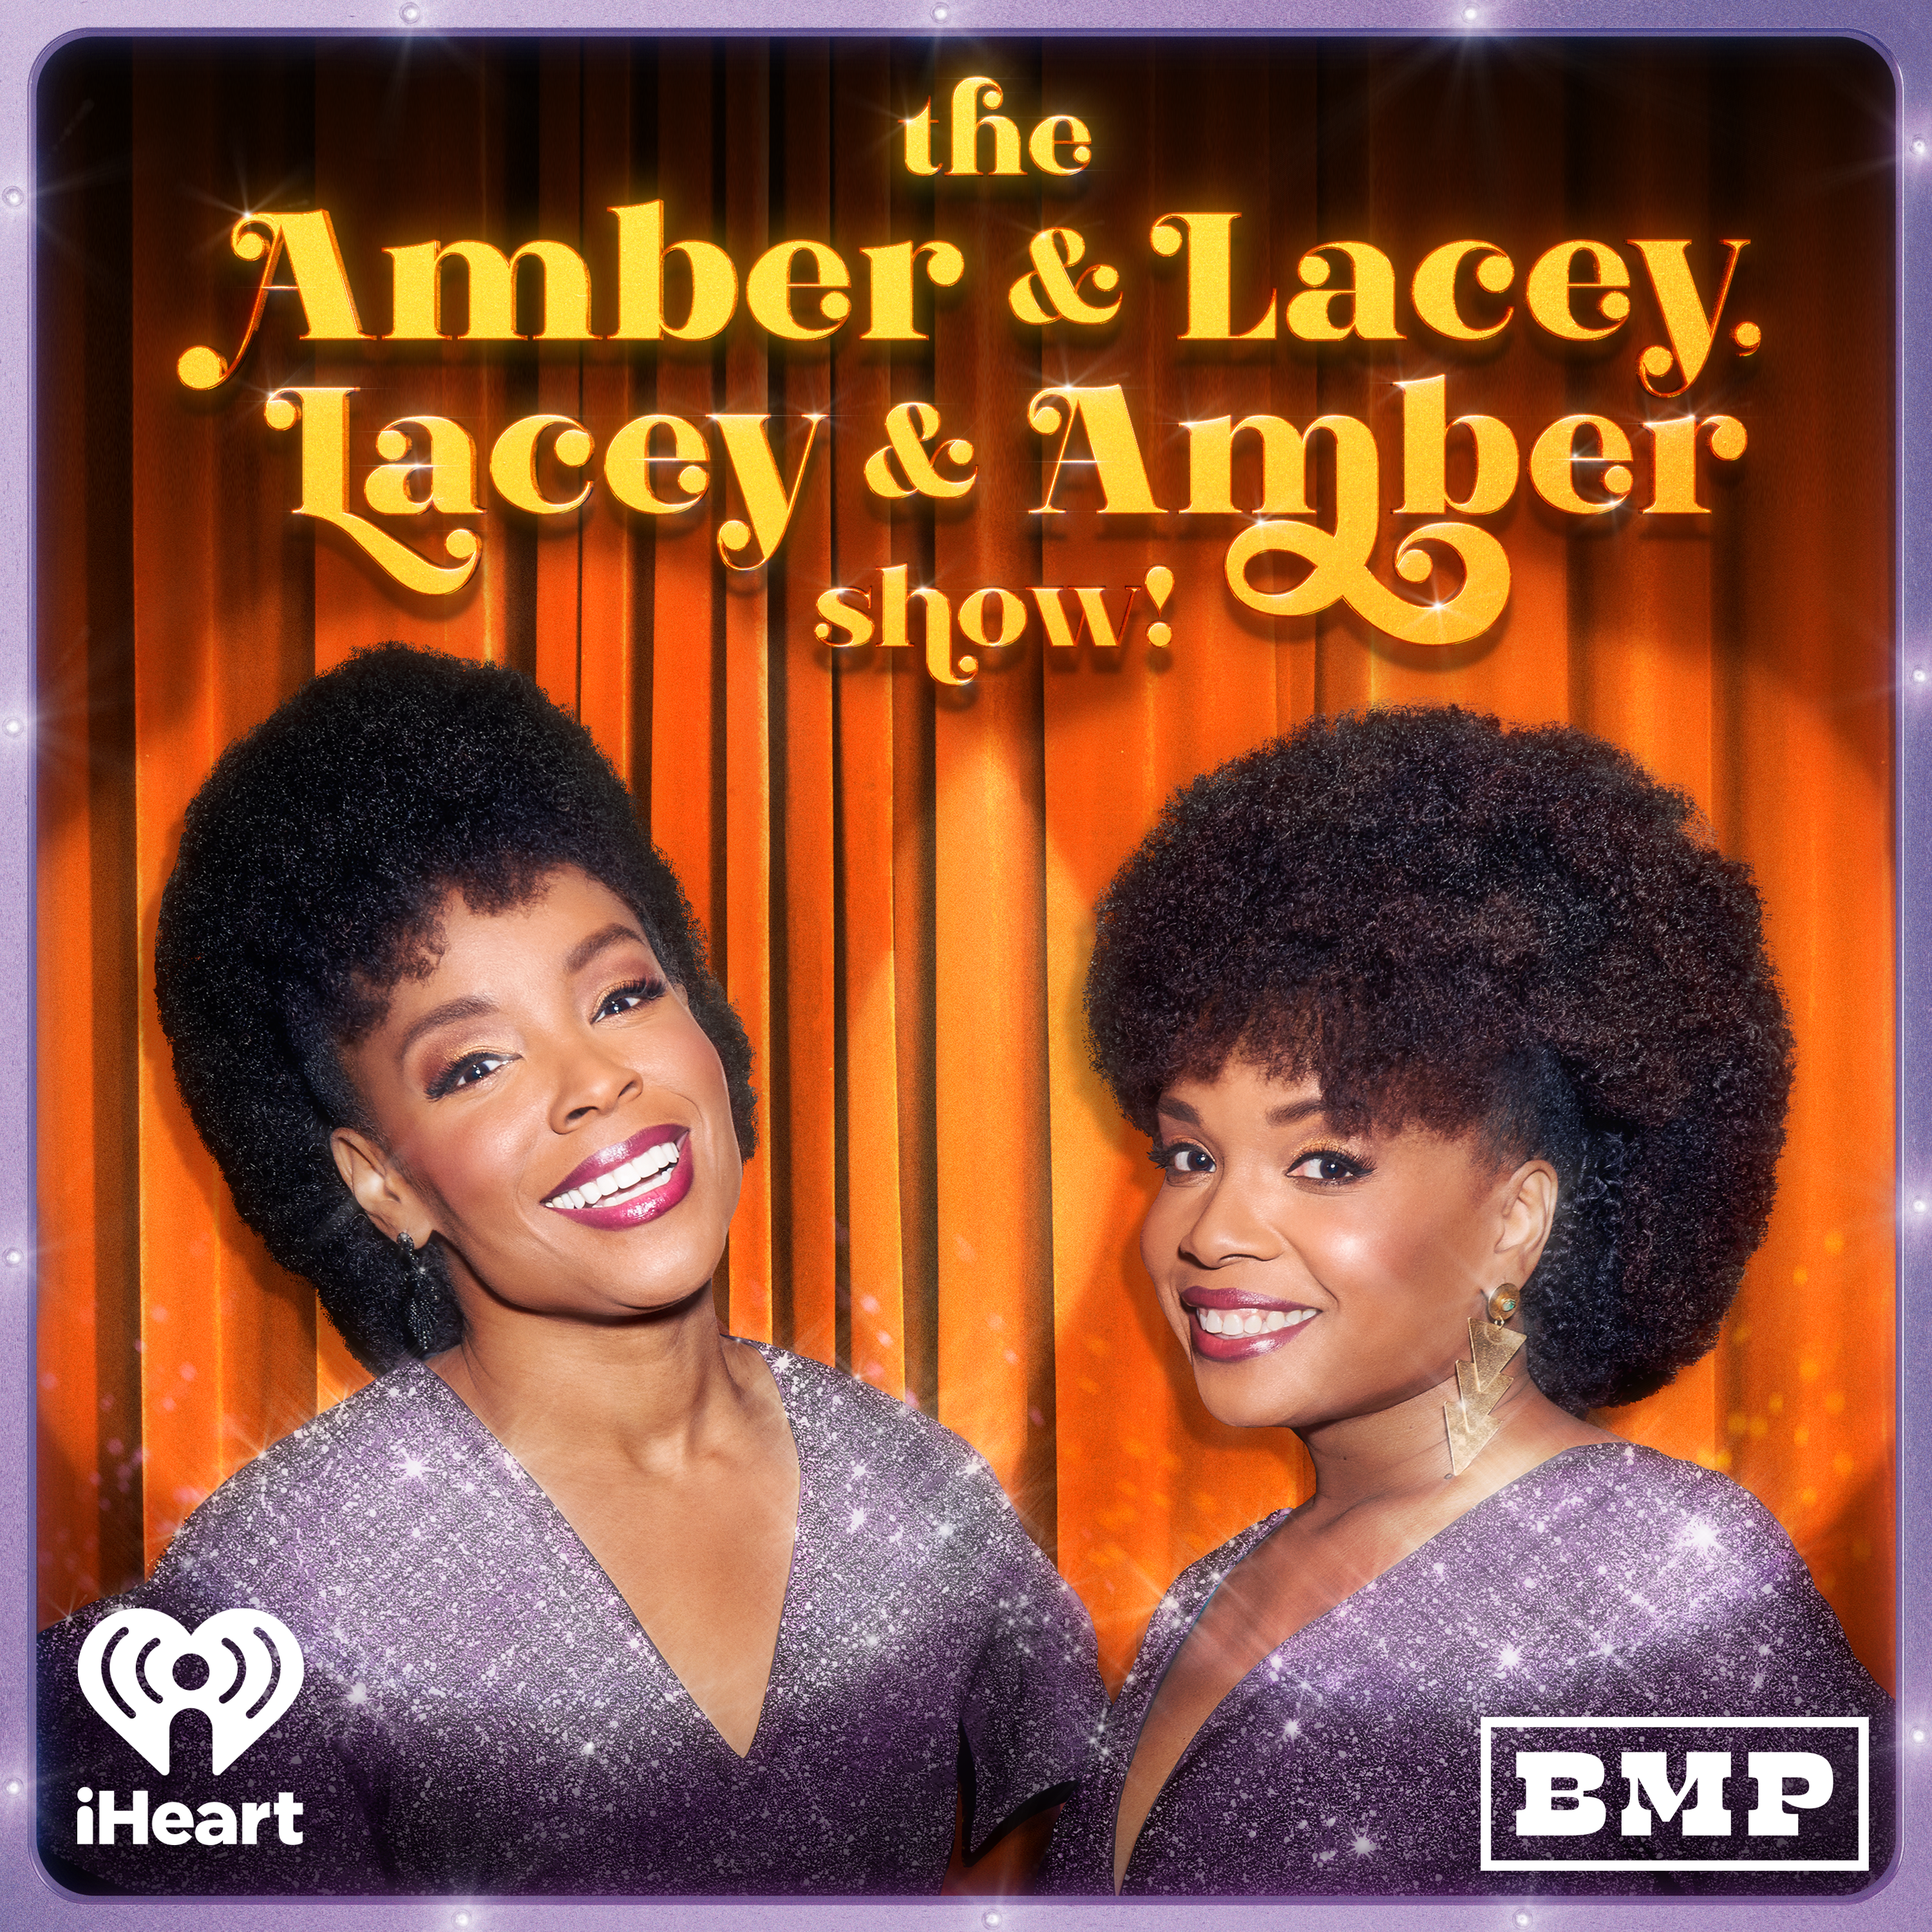 Met Gala Madness: This Week's Unbelievable Story From Amber Ruffin & Lacey Lamar